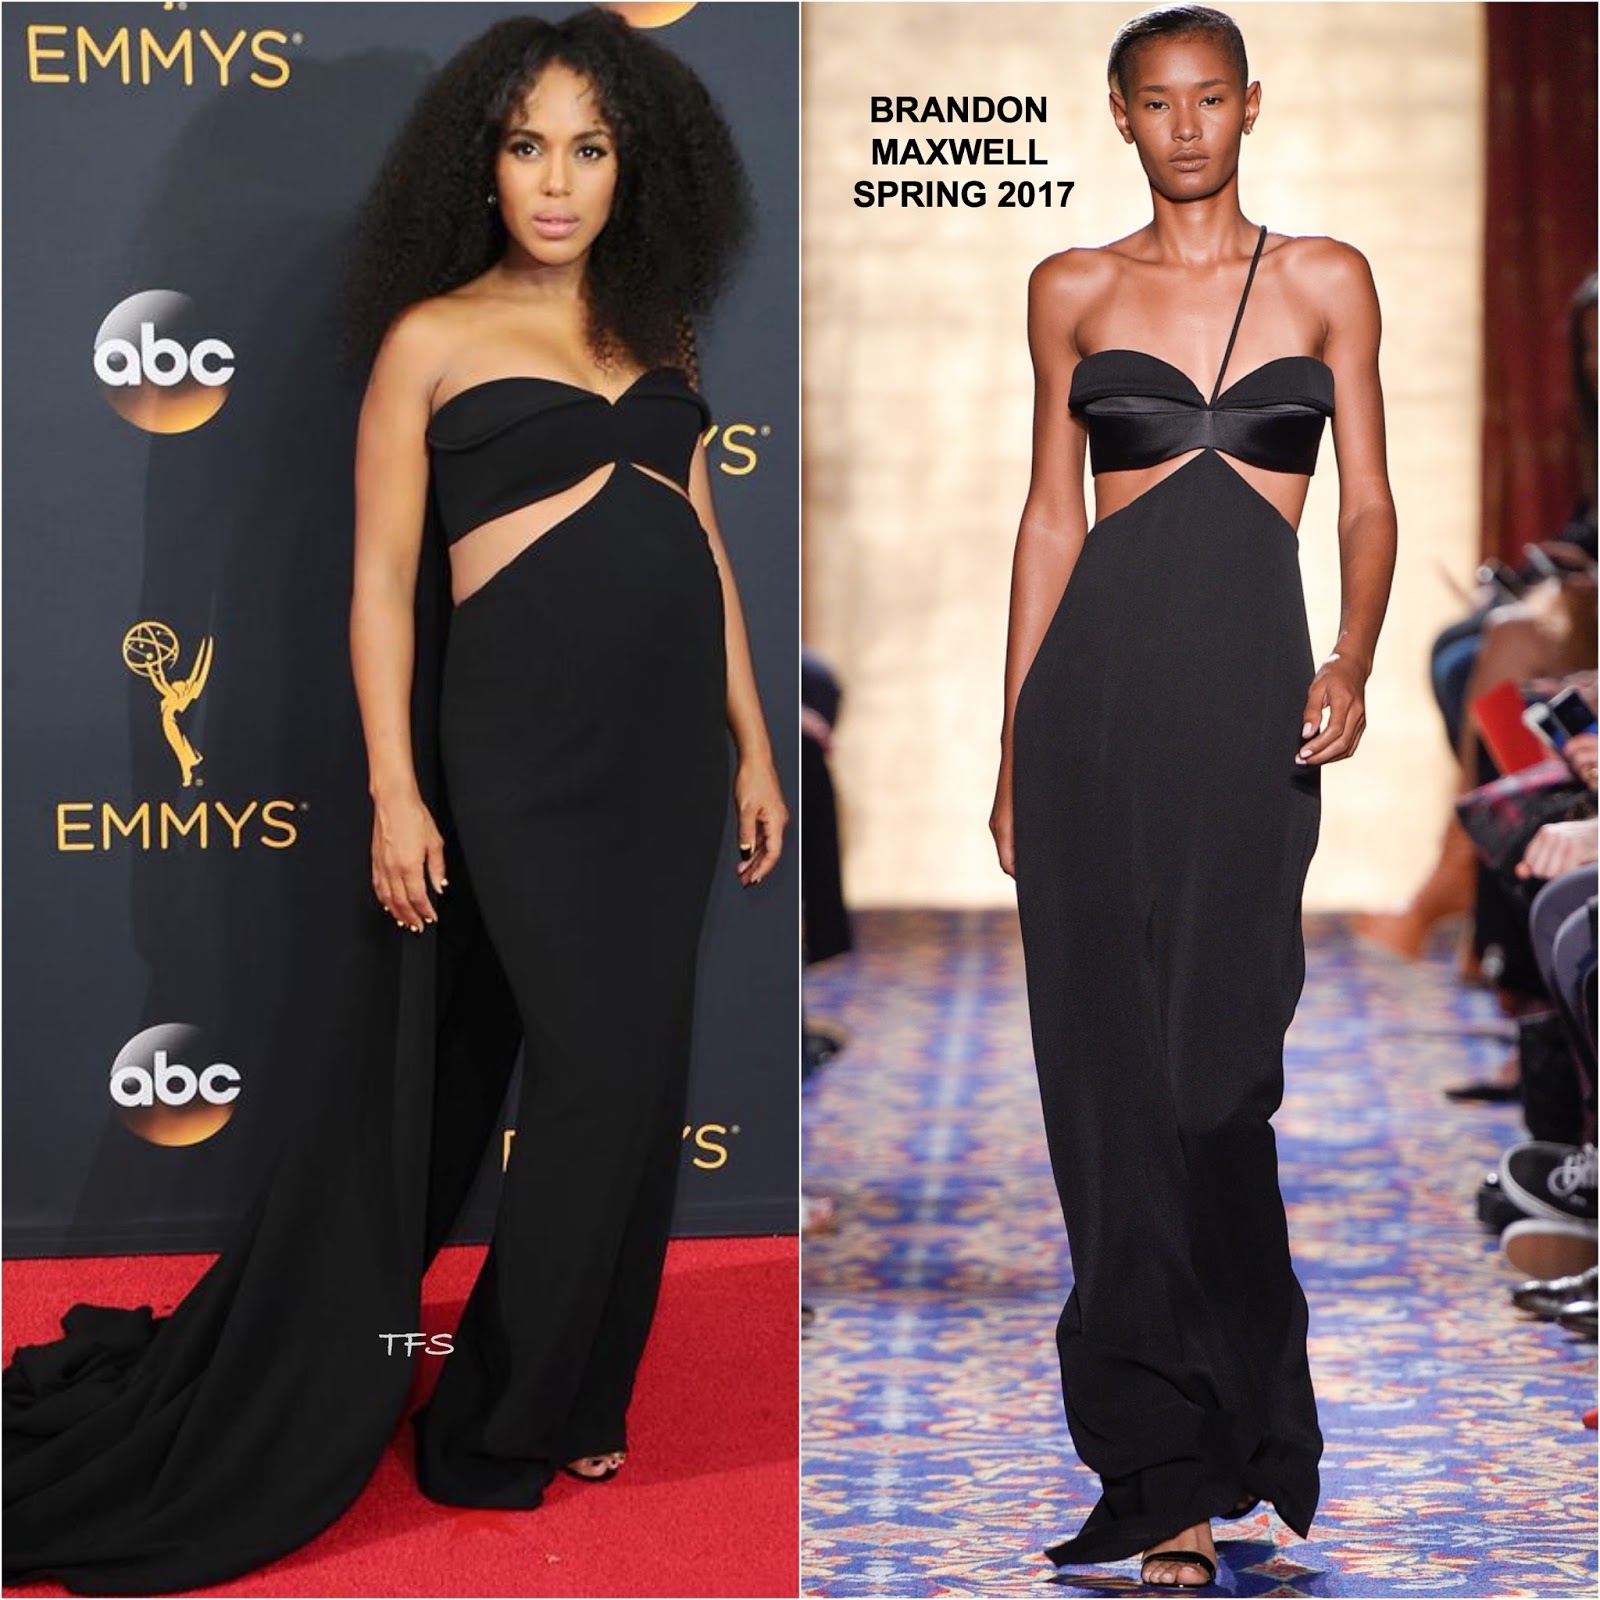 Kerry Washington in Brandon Maxwell at the 68th Primetime Emmy Awards